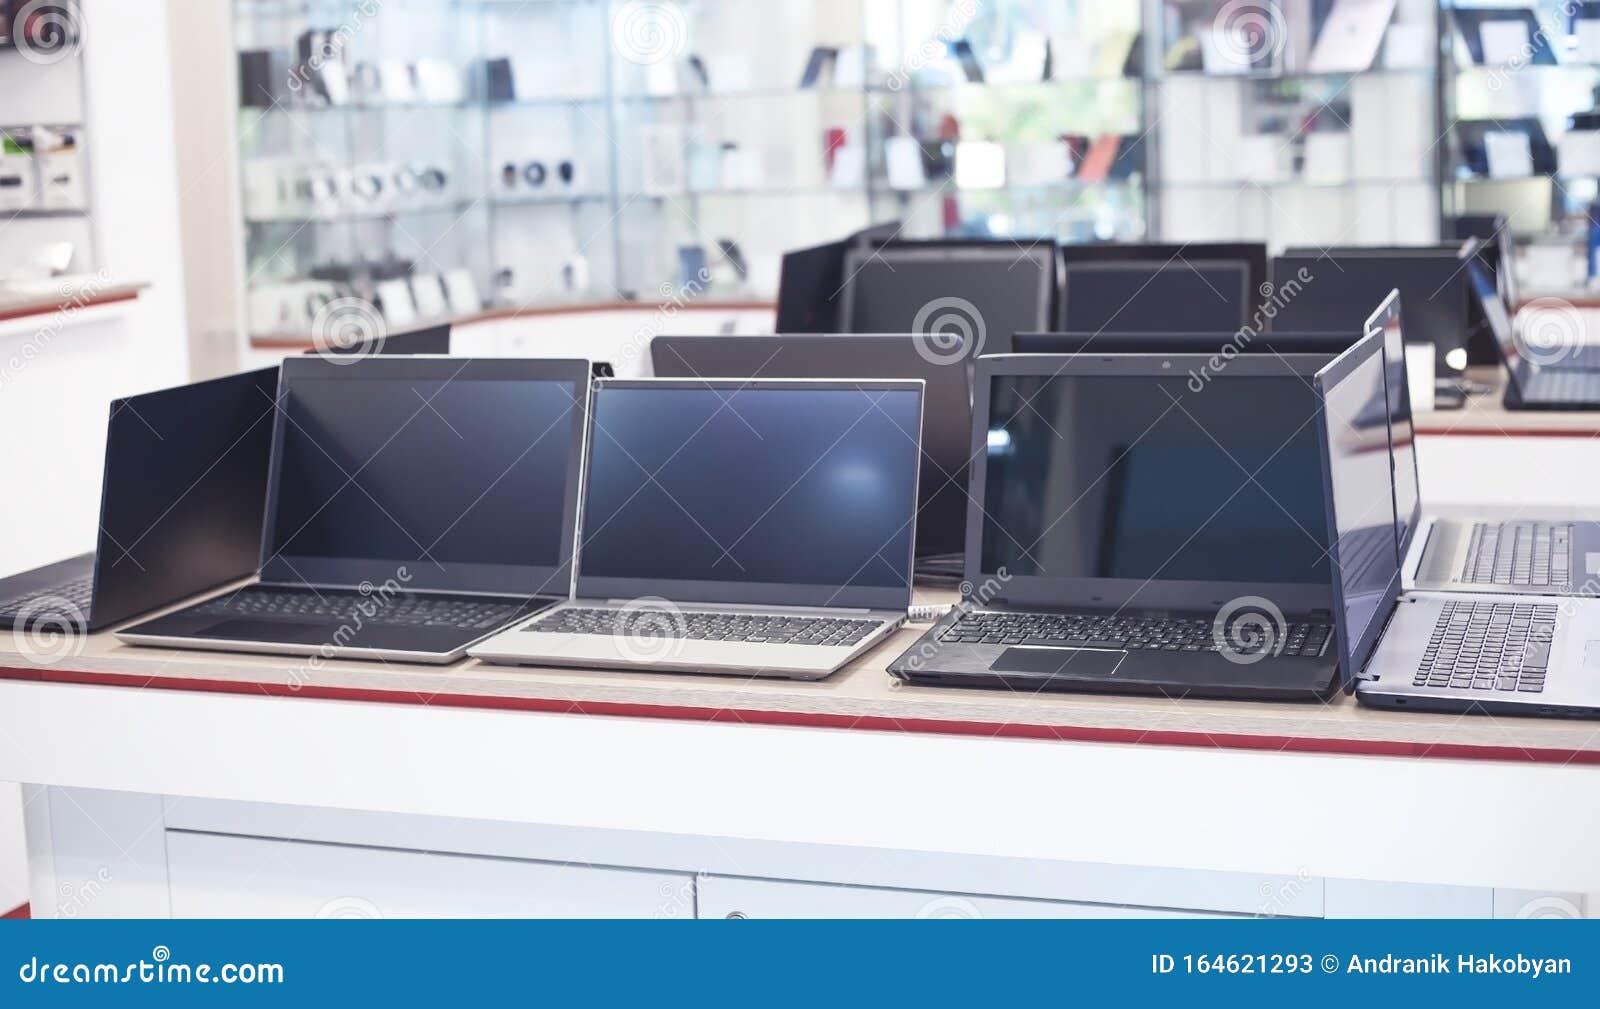 laptops on the table in the electronics store